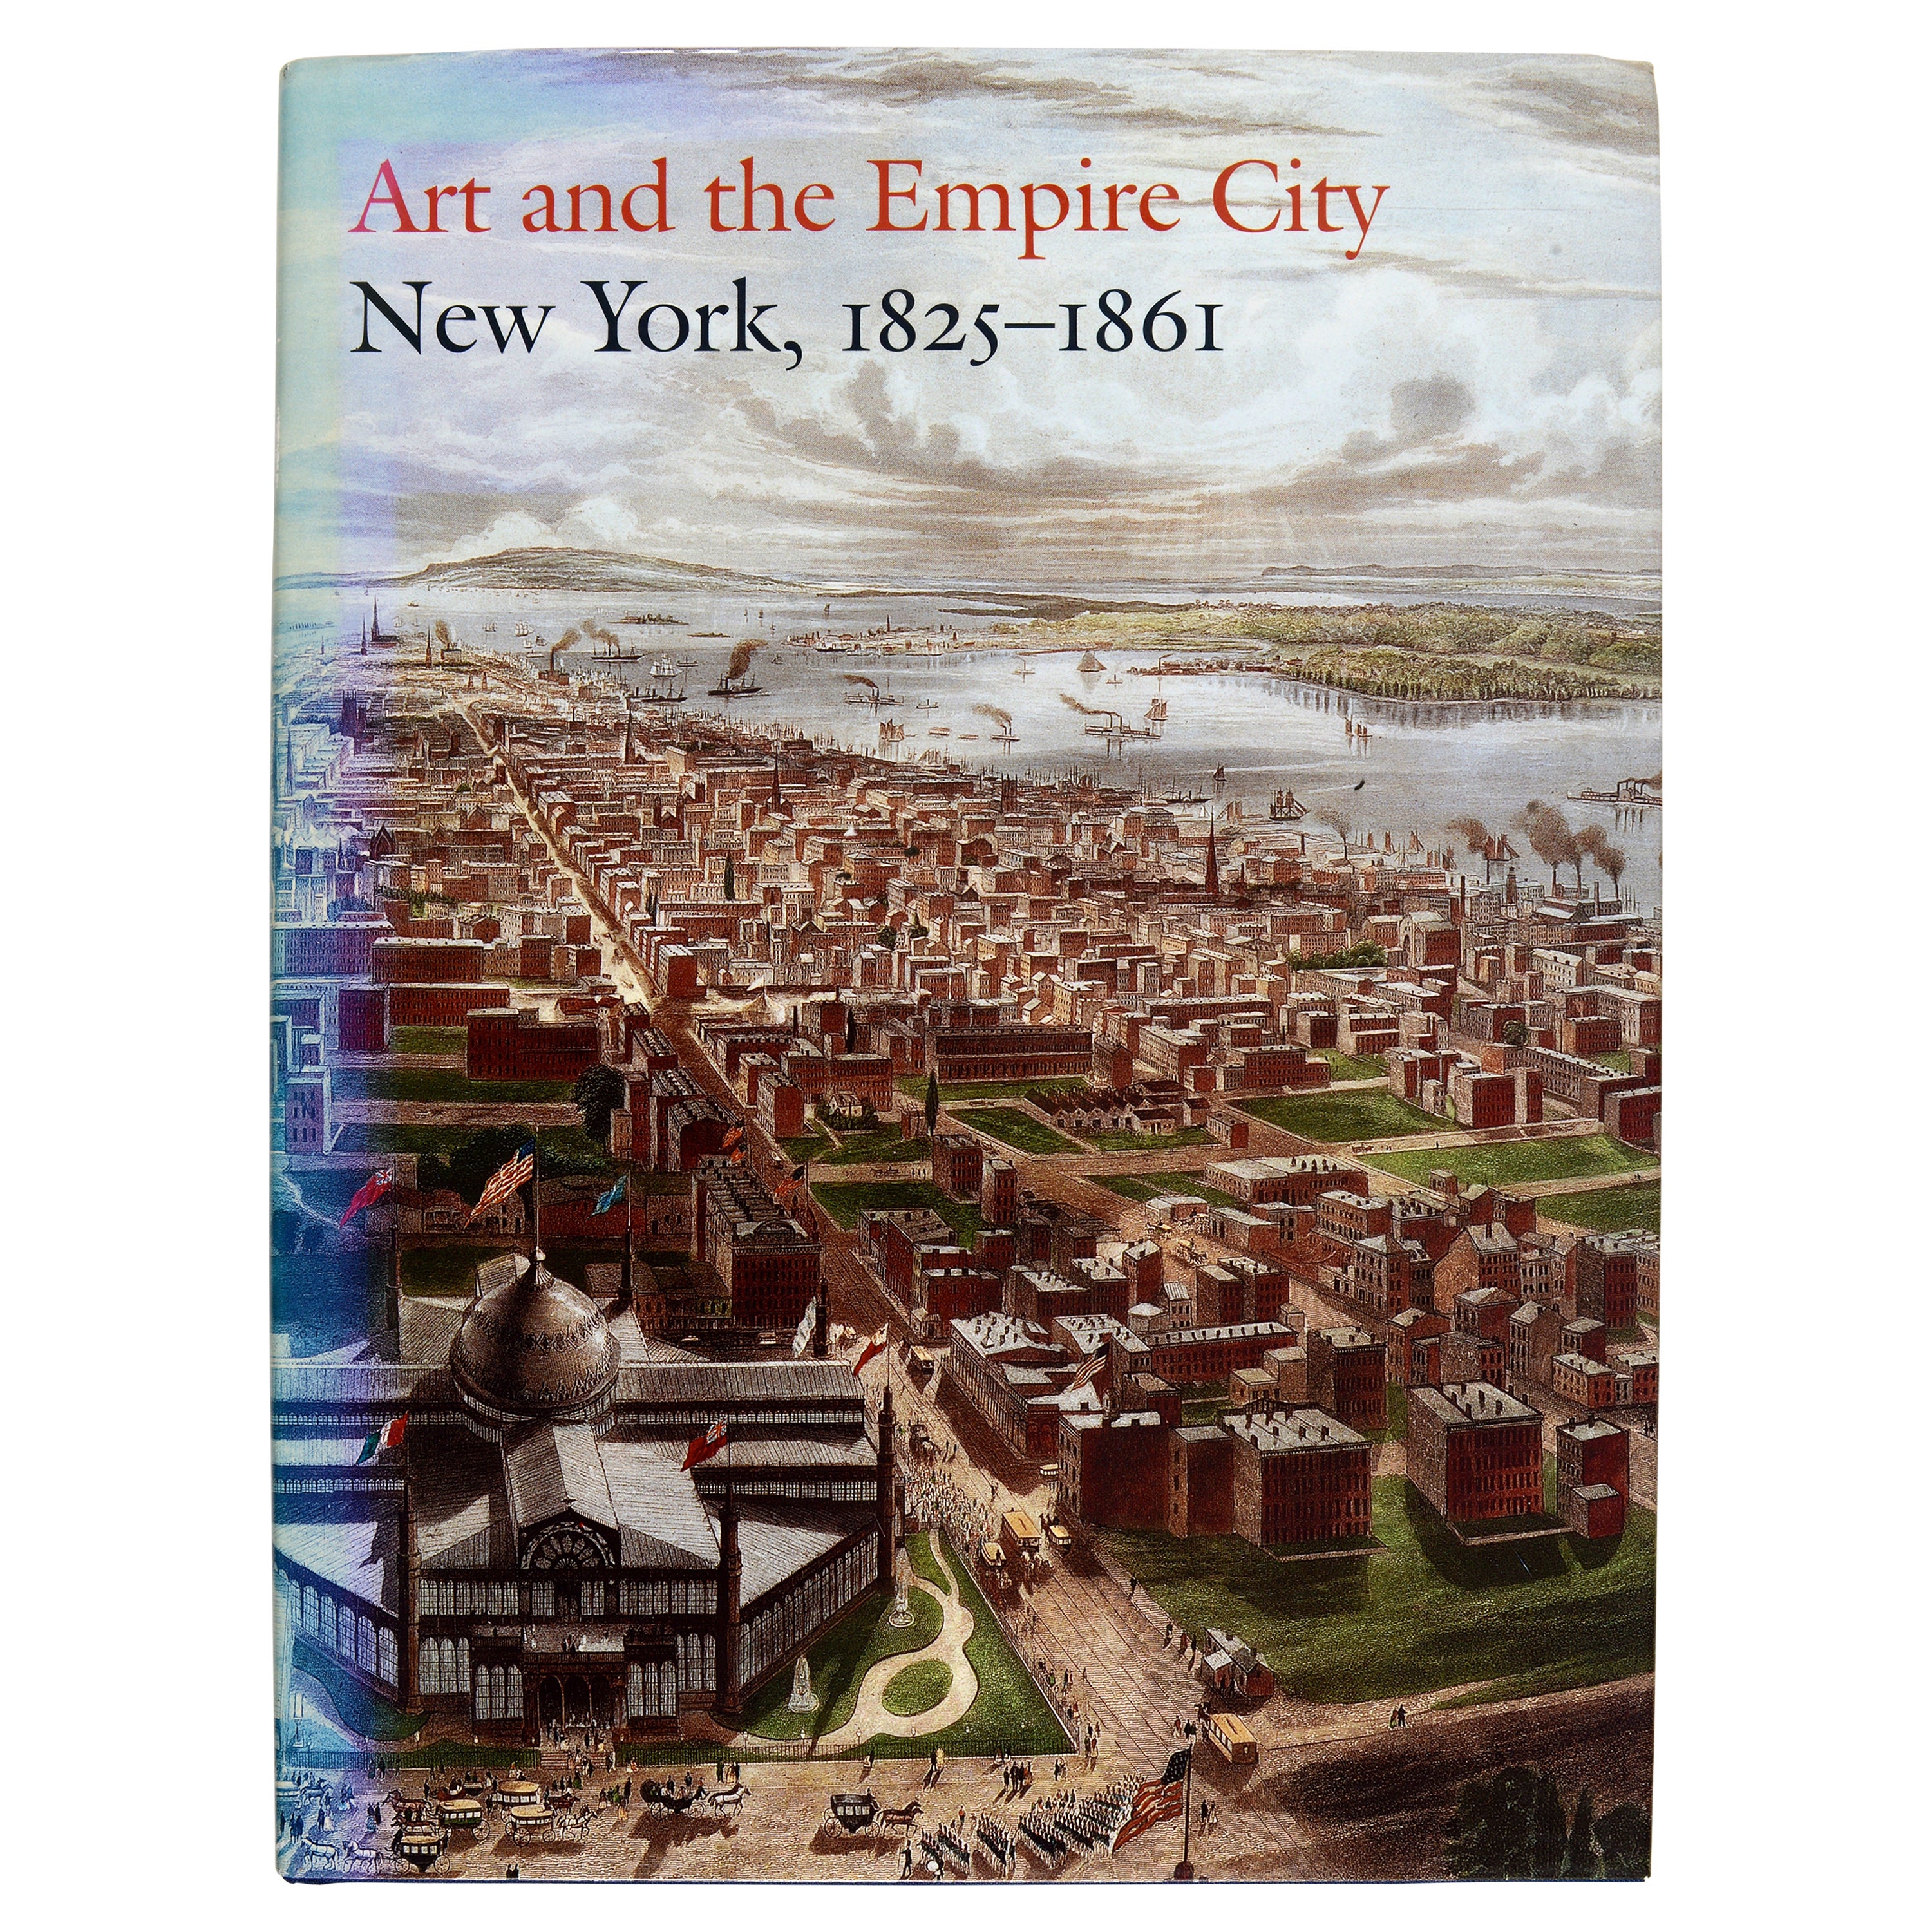 Art and the Empire City New York, 1825-1861, par Dell Upton, 1st Ed